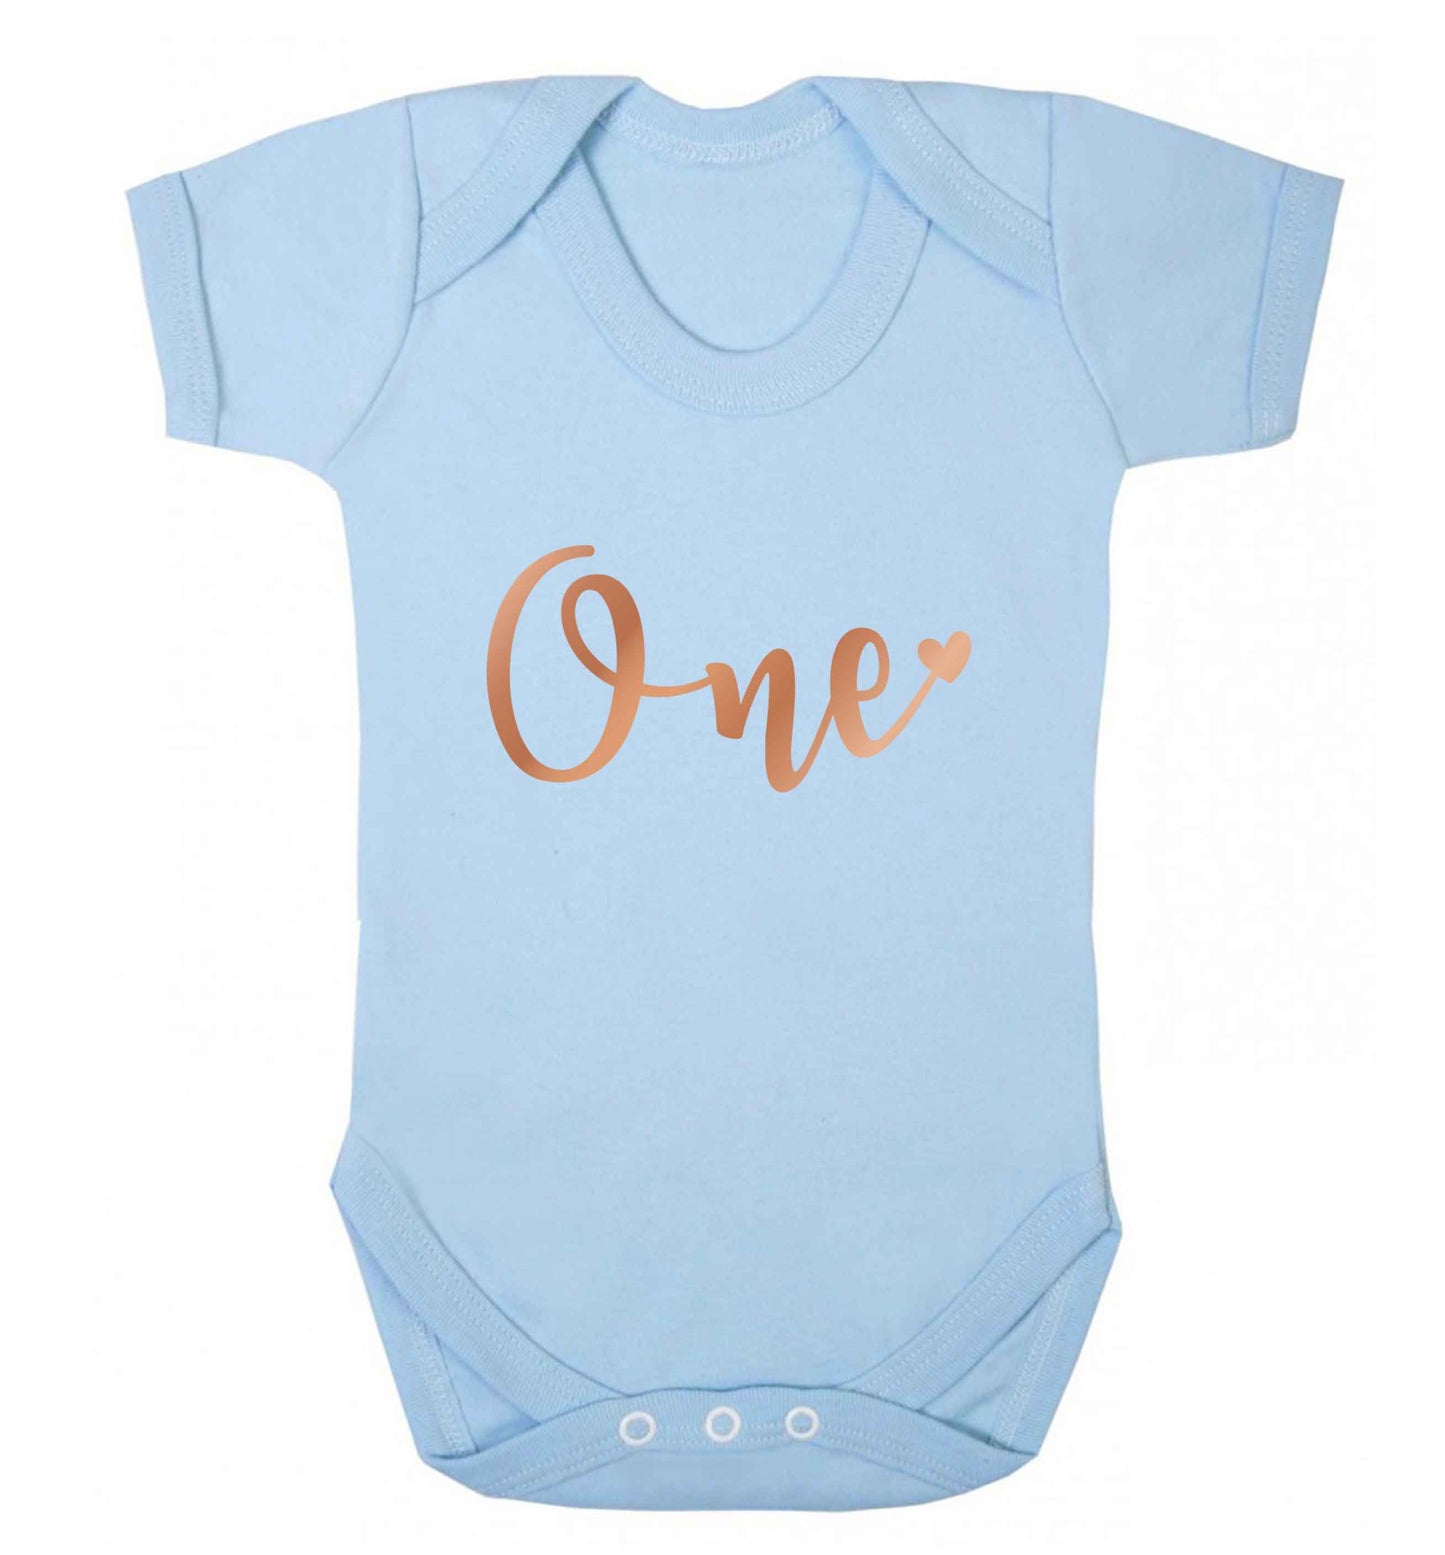 Rose Gold One baby vest pale blue 18-24 months